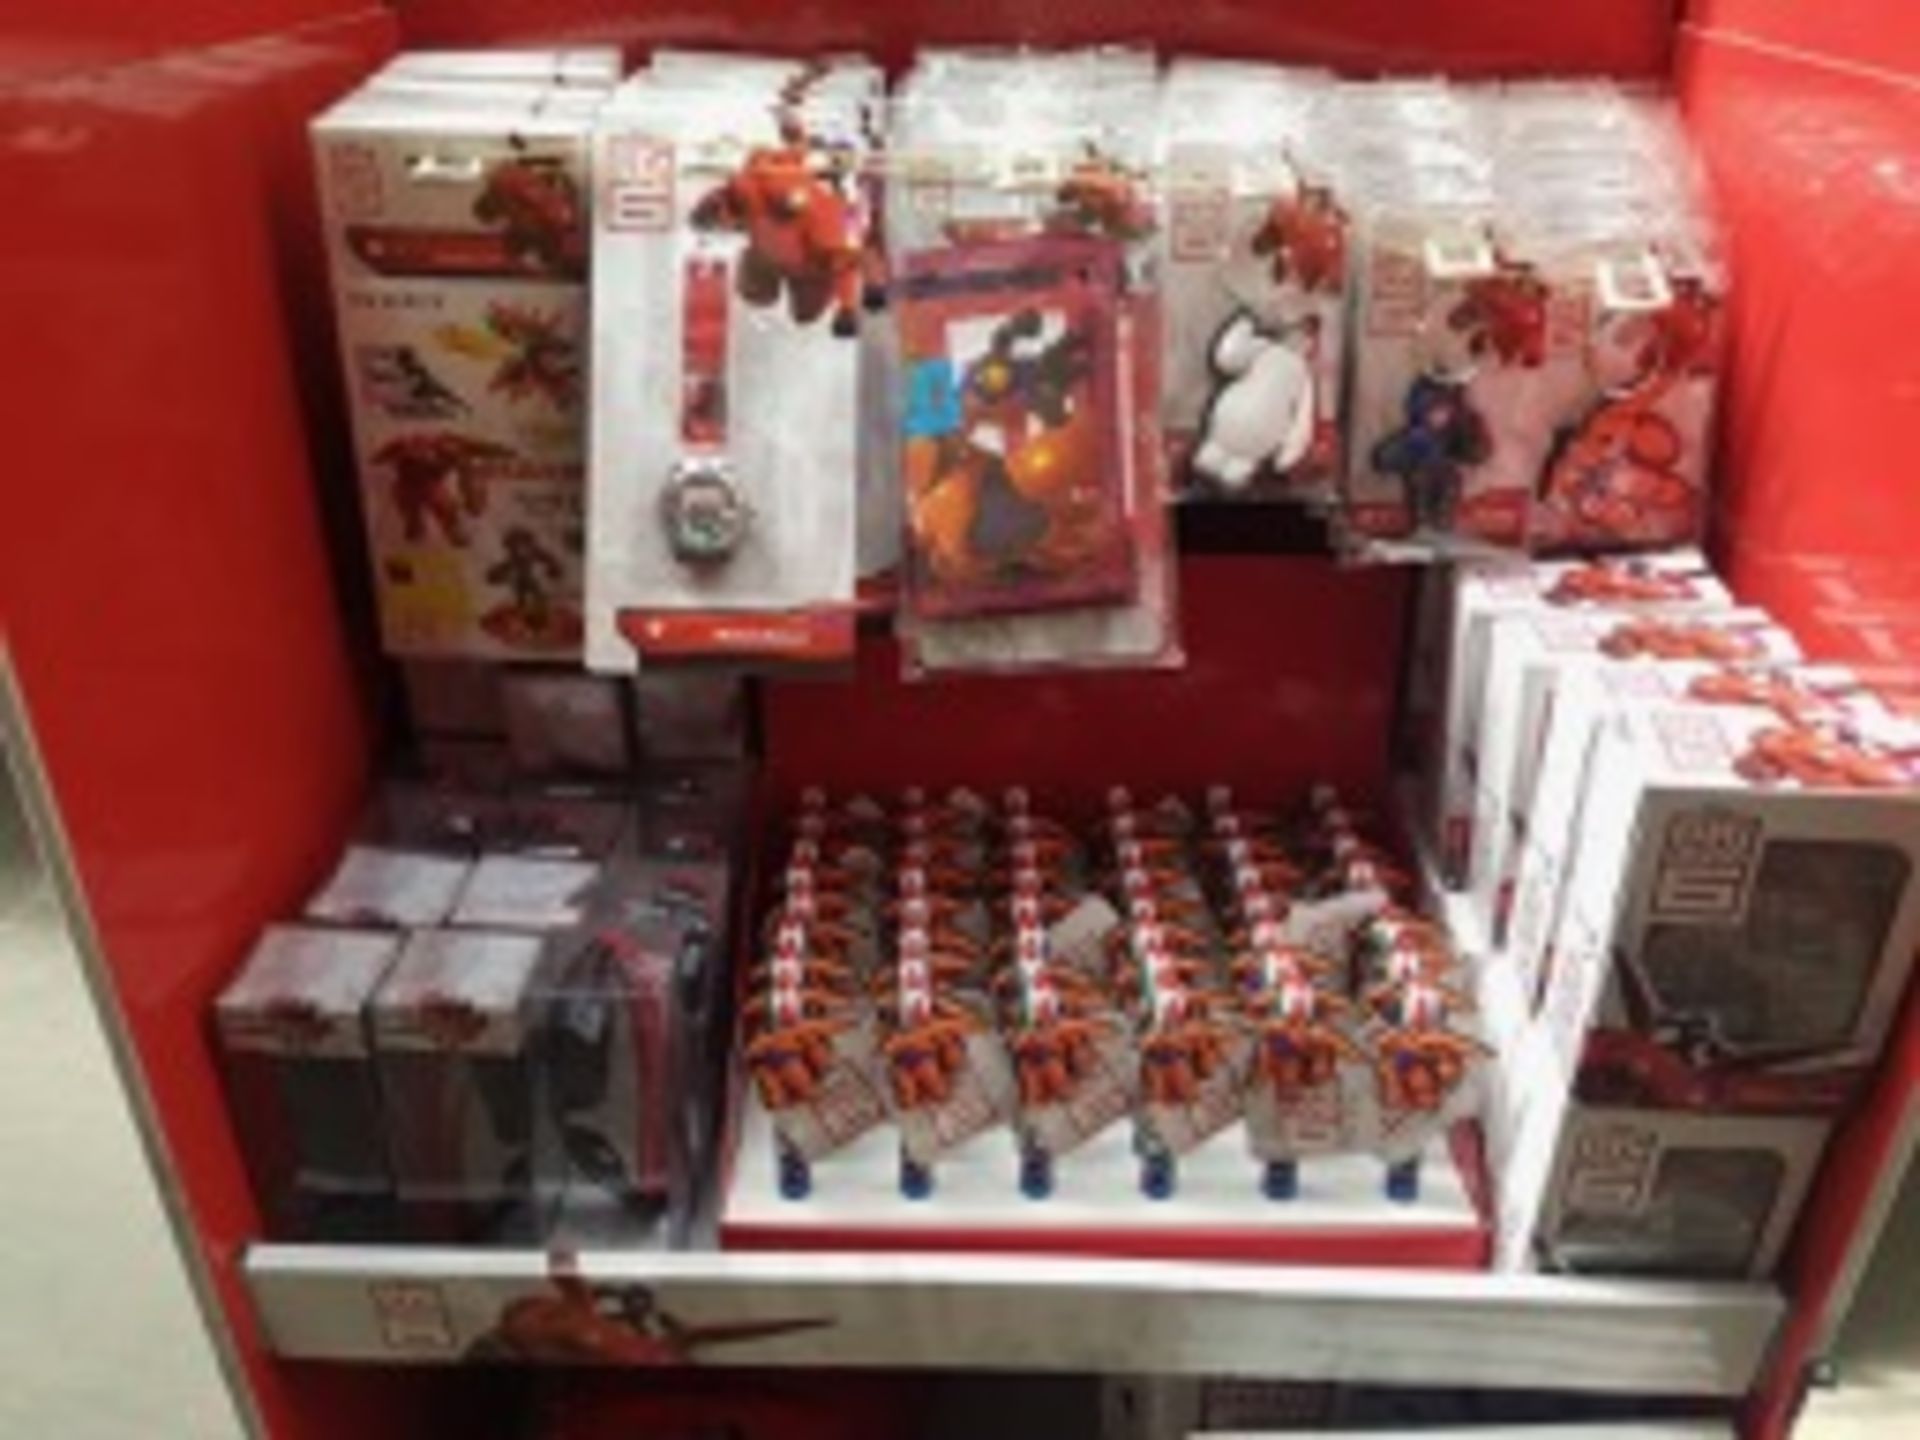 1 x Brand New Big Hero 6 - 328 piece Full Shop Display Unit. Contains: 36 Sticker Sets, 16 - Image 3 of 7